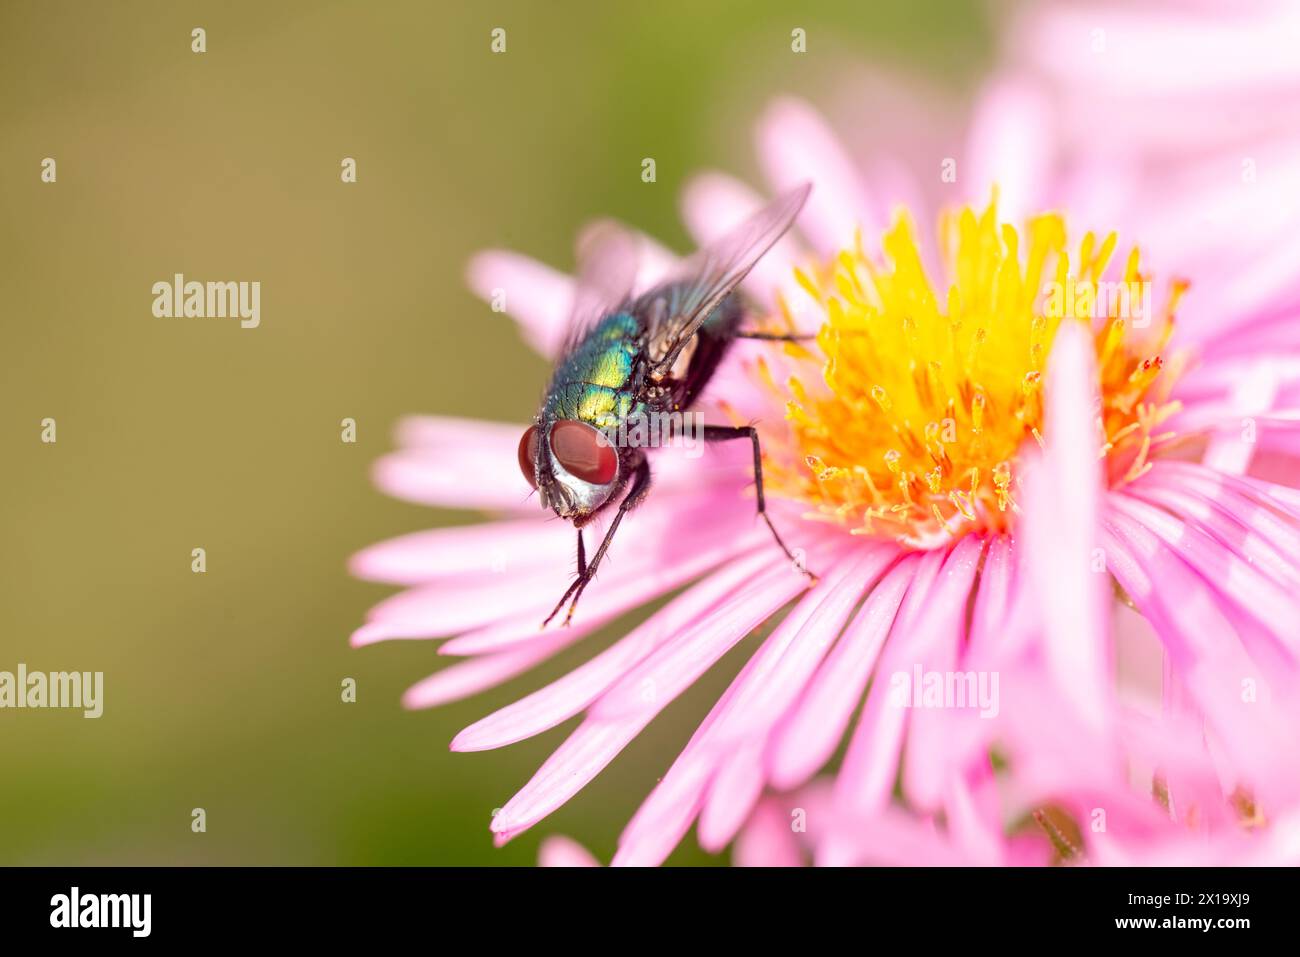 Common green bottle fly on a pink flower Stock Photo